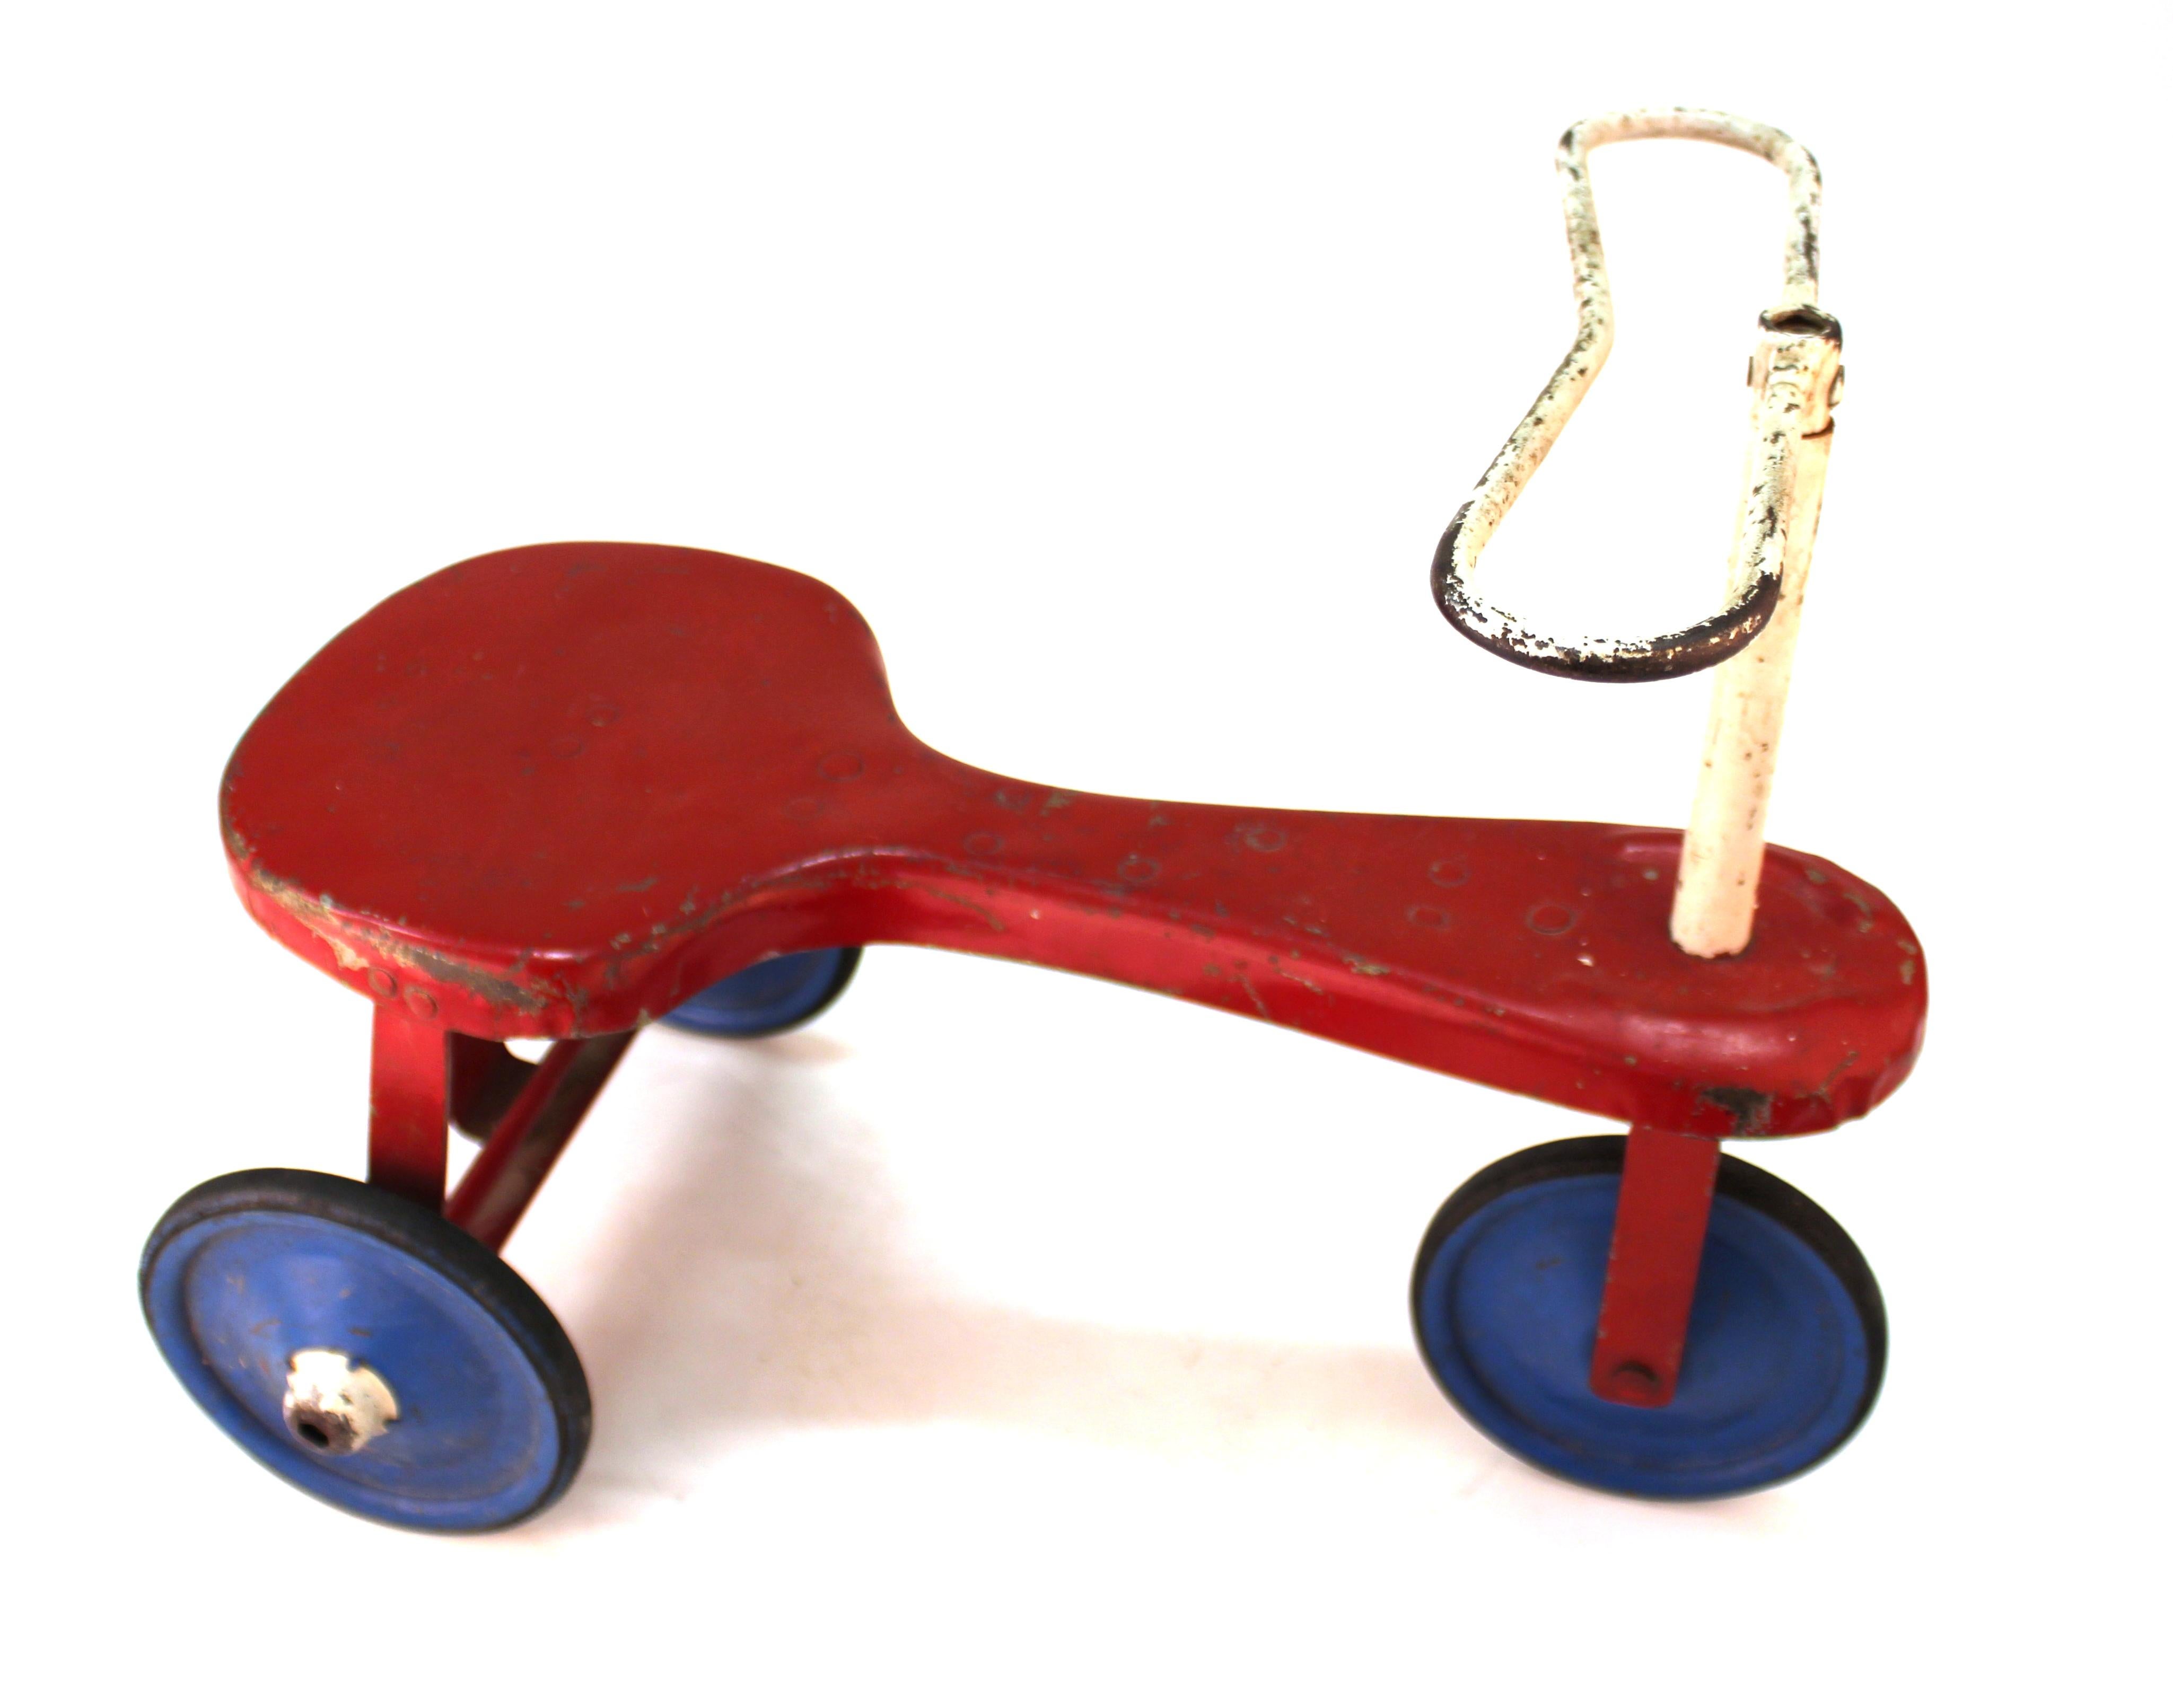 Modern period vintage toy tricycle, made in the 1940s. The item has a metal frame and its original rubber wheels. The piece is in great vintage condition with rustic wear to all surfaces.